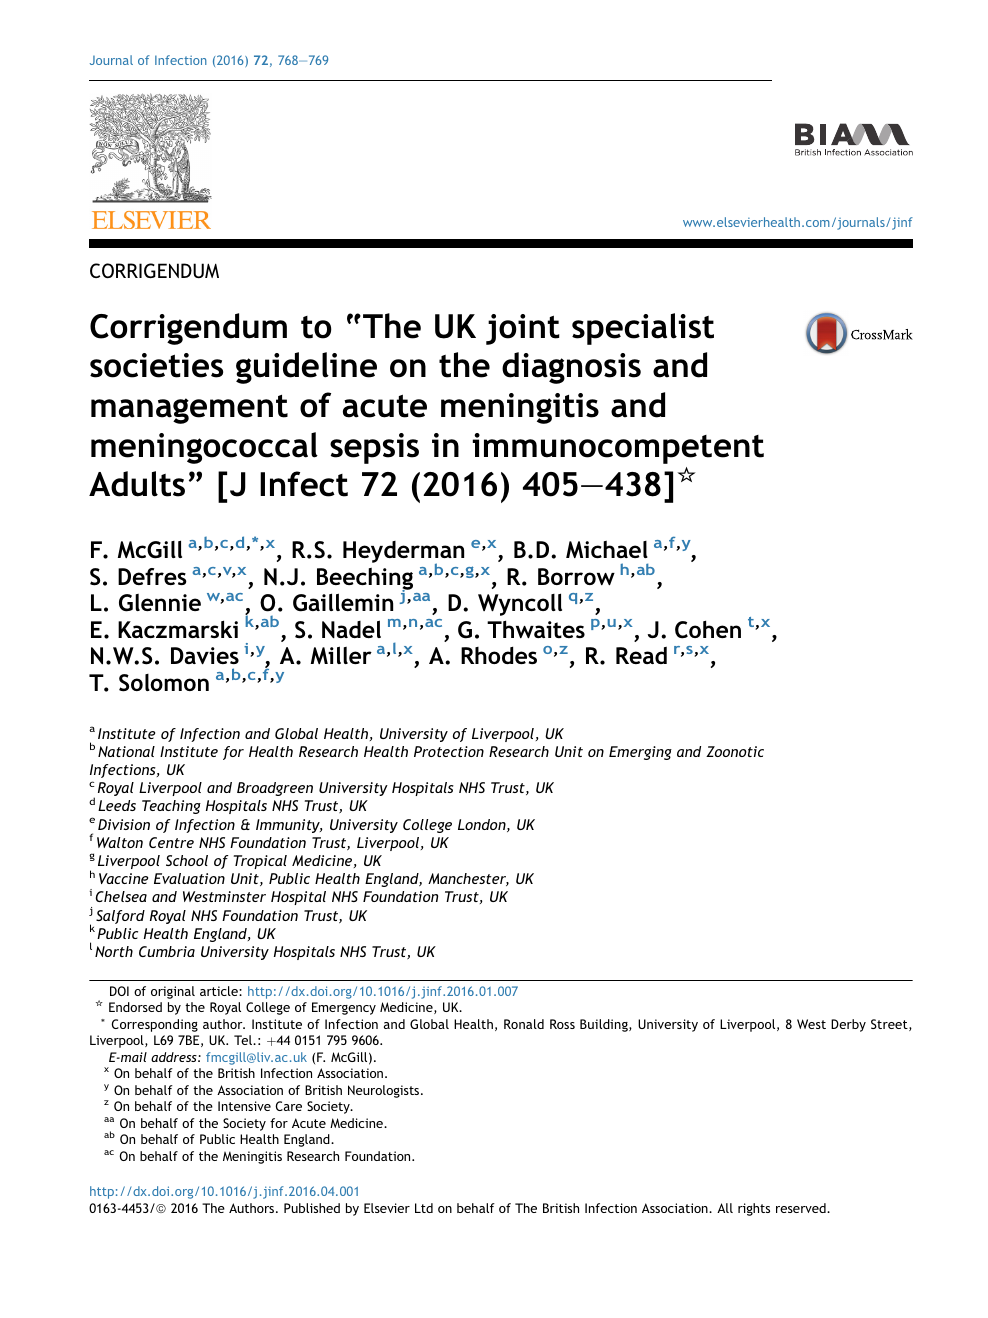 Corrigendum To The Uk Joint Specialist Societies Guideline On The Diagnosis And Management Of Acute Meningitis And Meningococcal Sepsis In Immunocompetent Adults J Infect 72 2016 405 438 Topic Of Research Paper